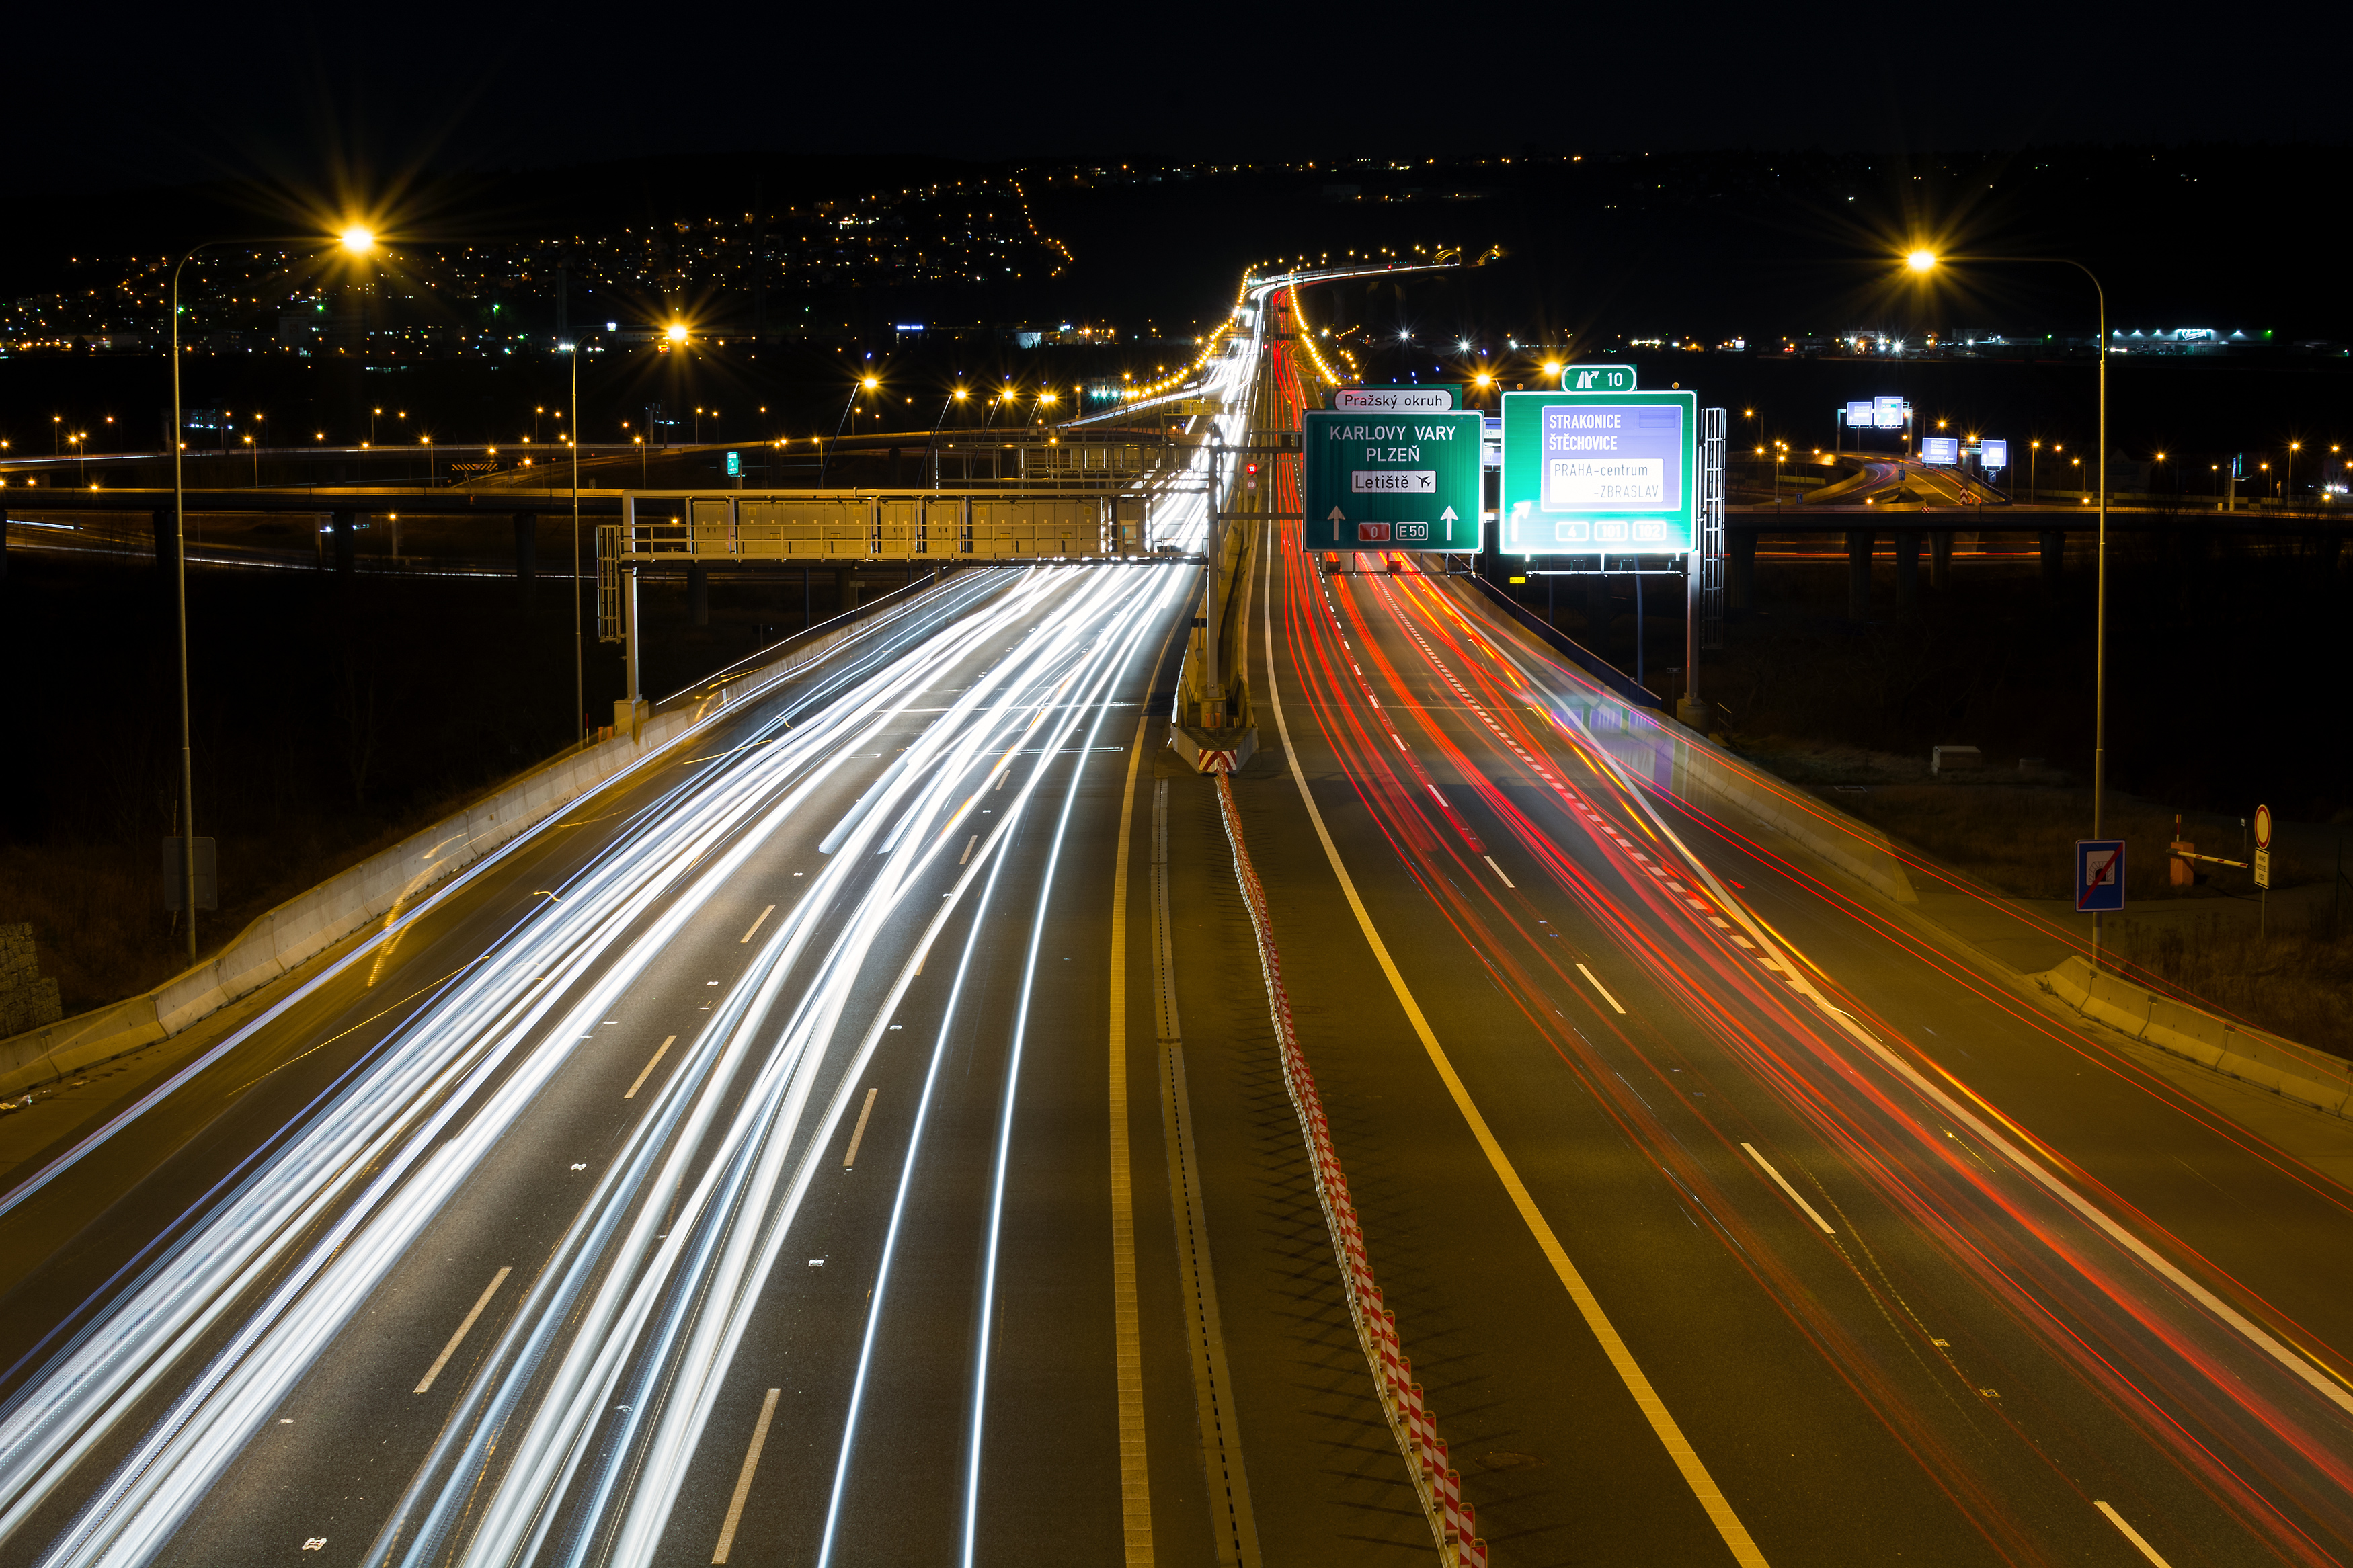 Free Image: Light Trails on the Highway | Libreshot Public Domain Photos